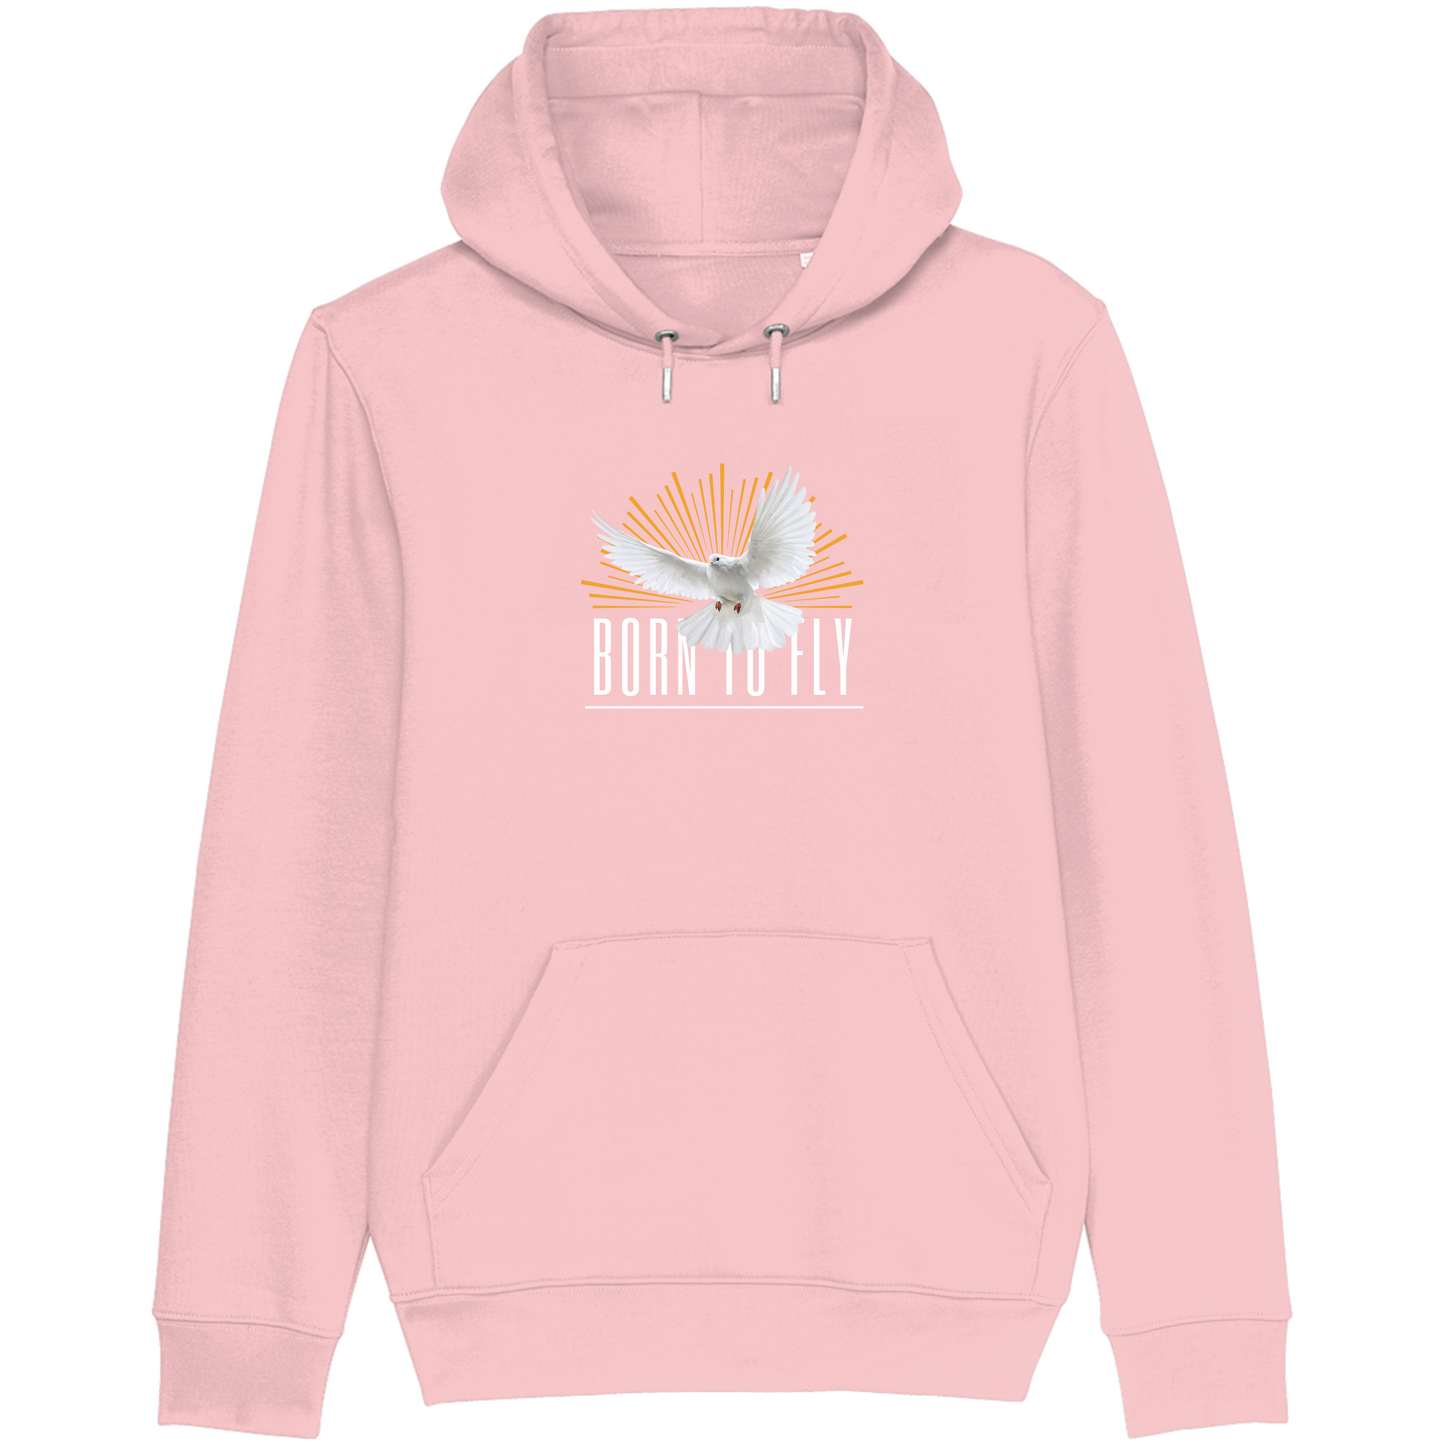 Born To Fly - Hoodie